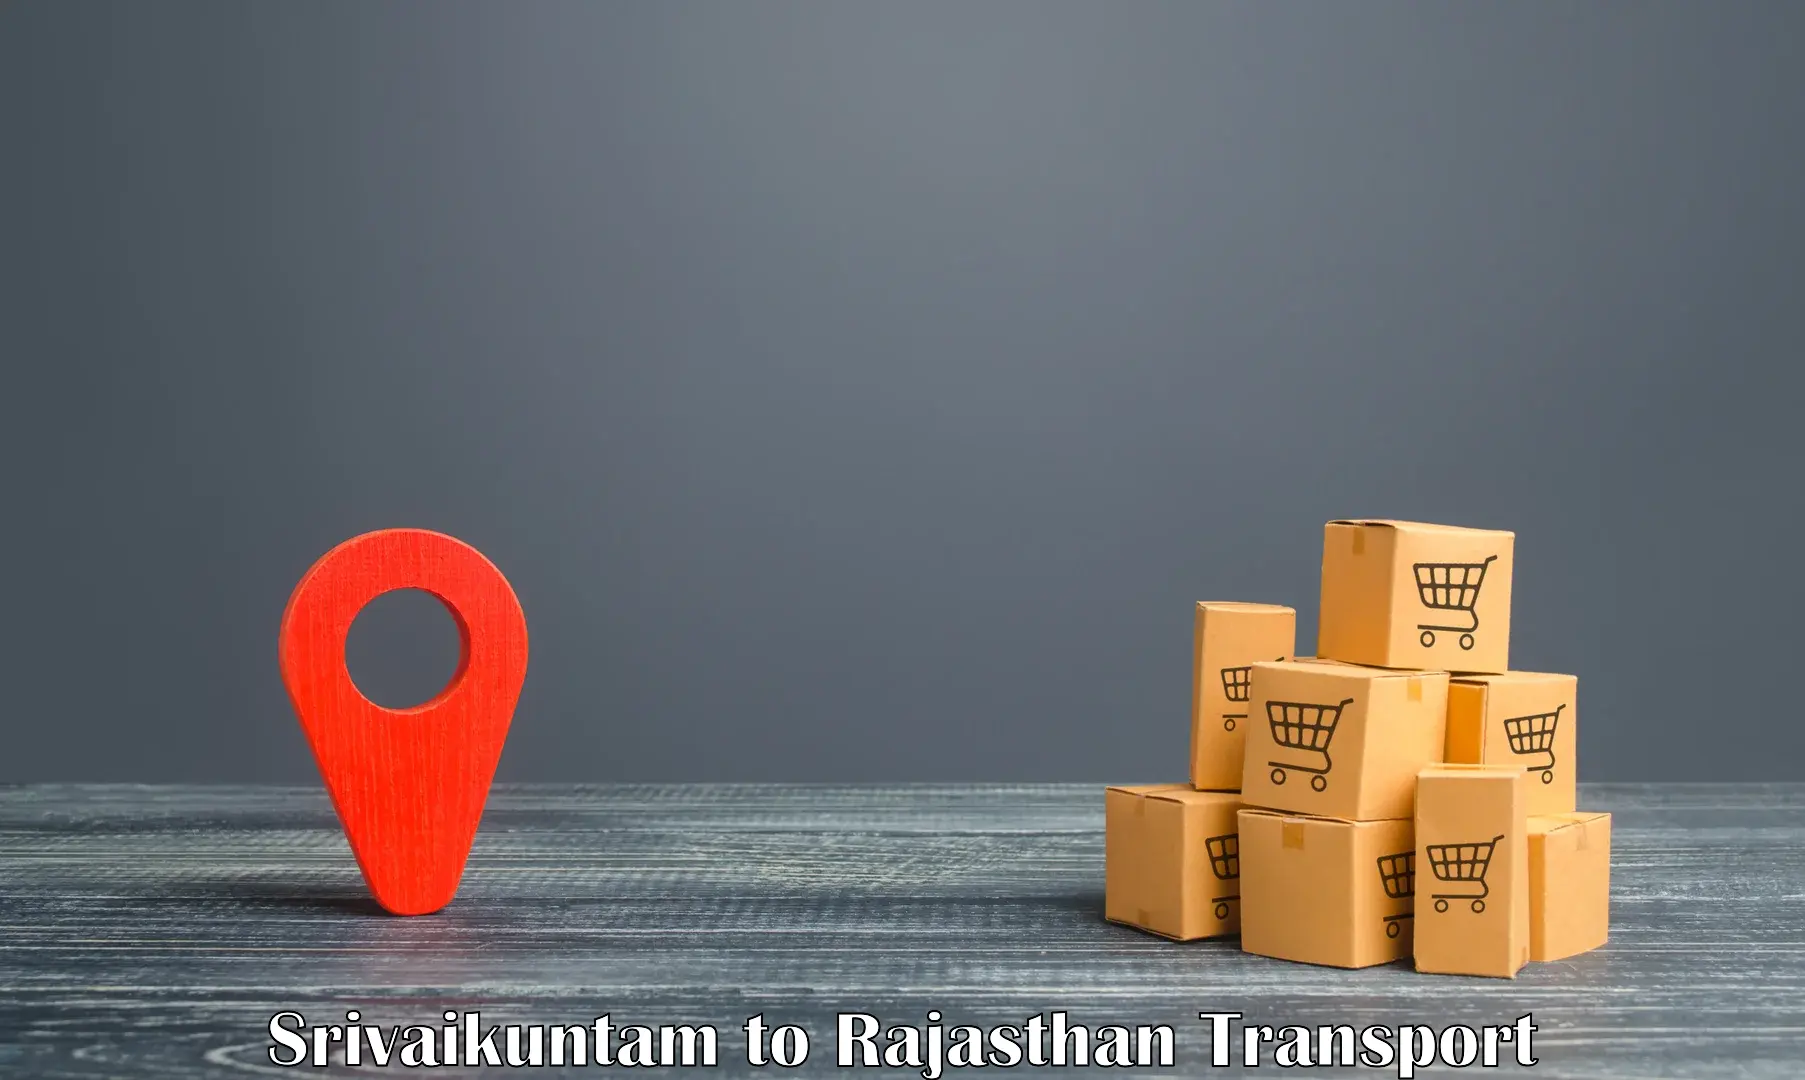 Delivery service Srivaikuntam to Rajasthan